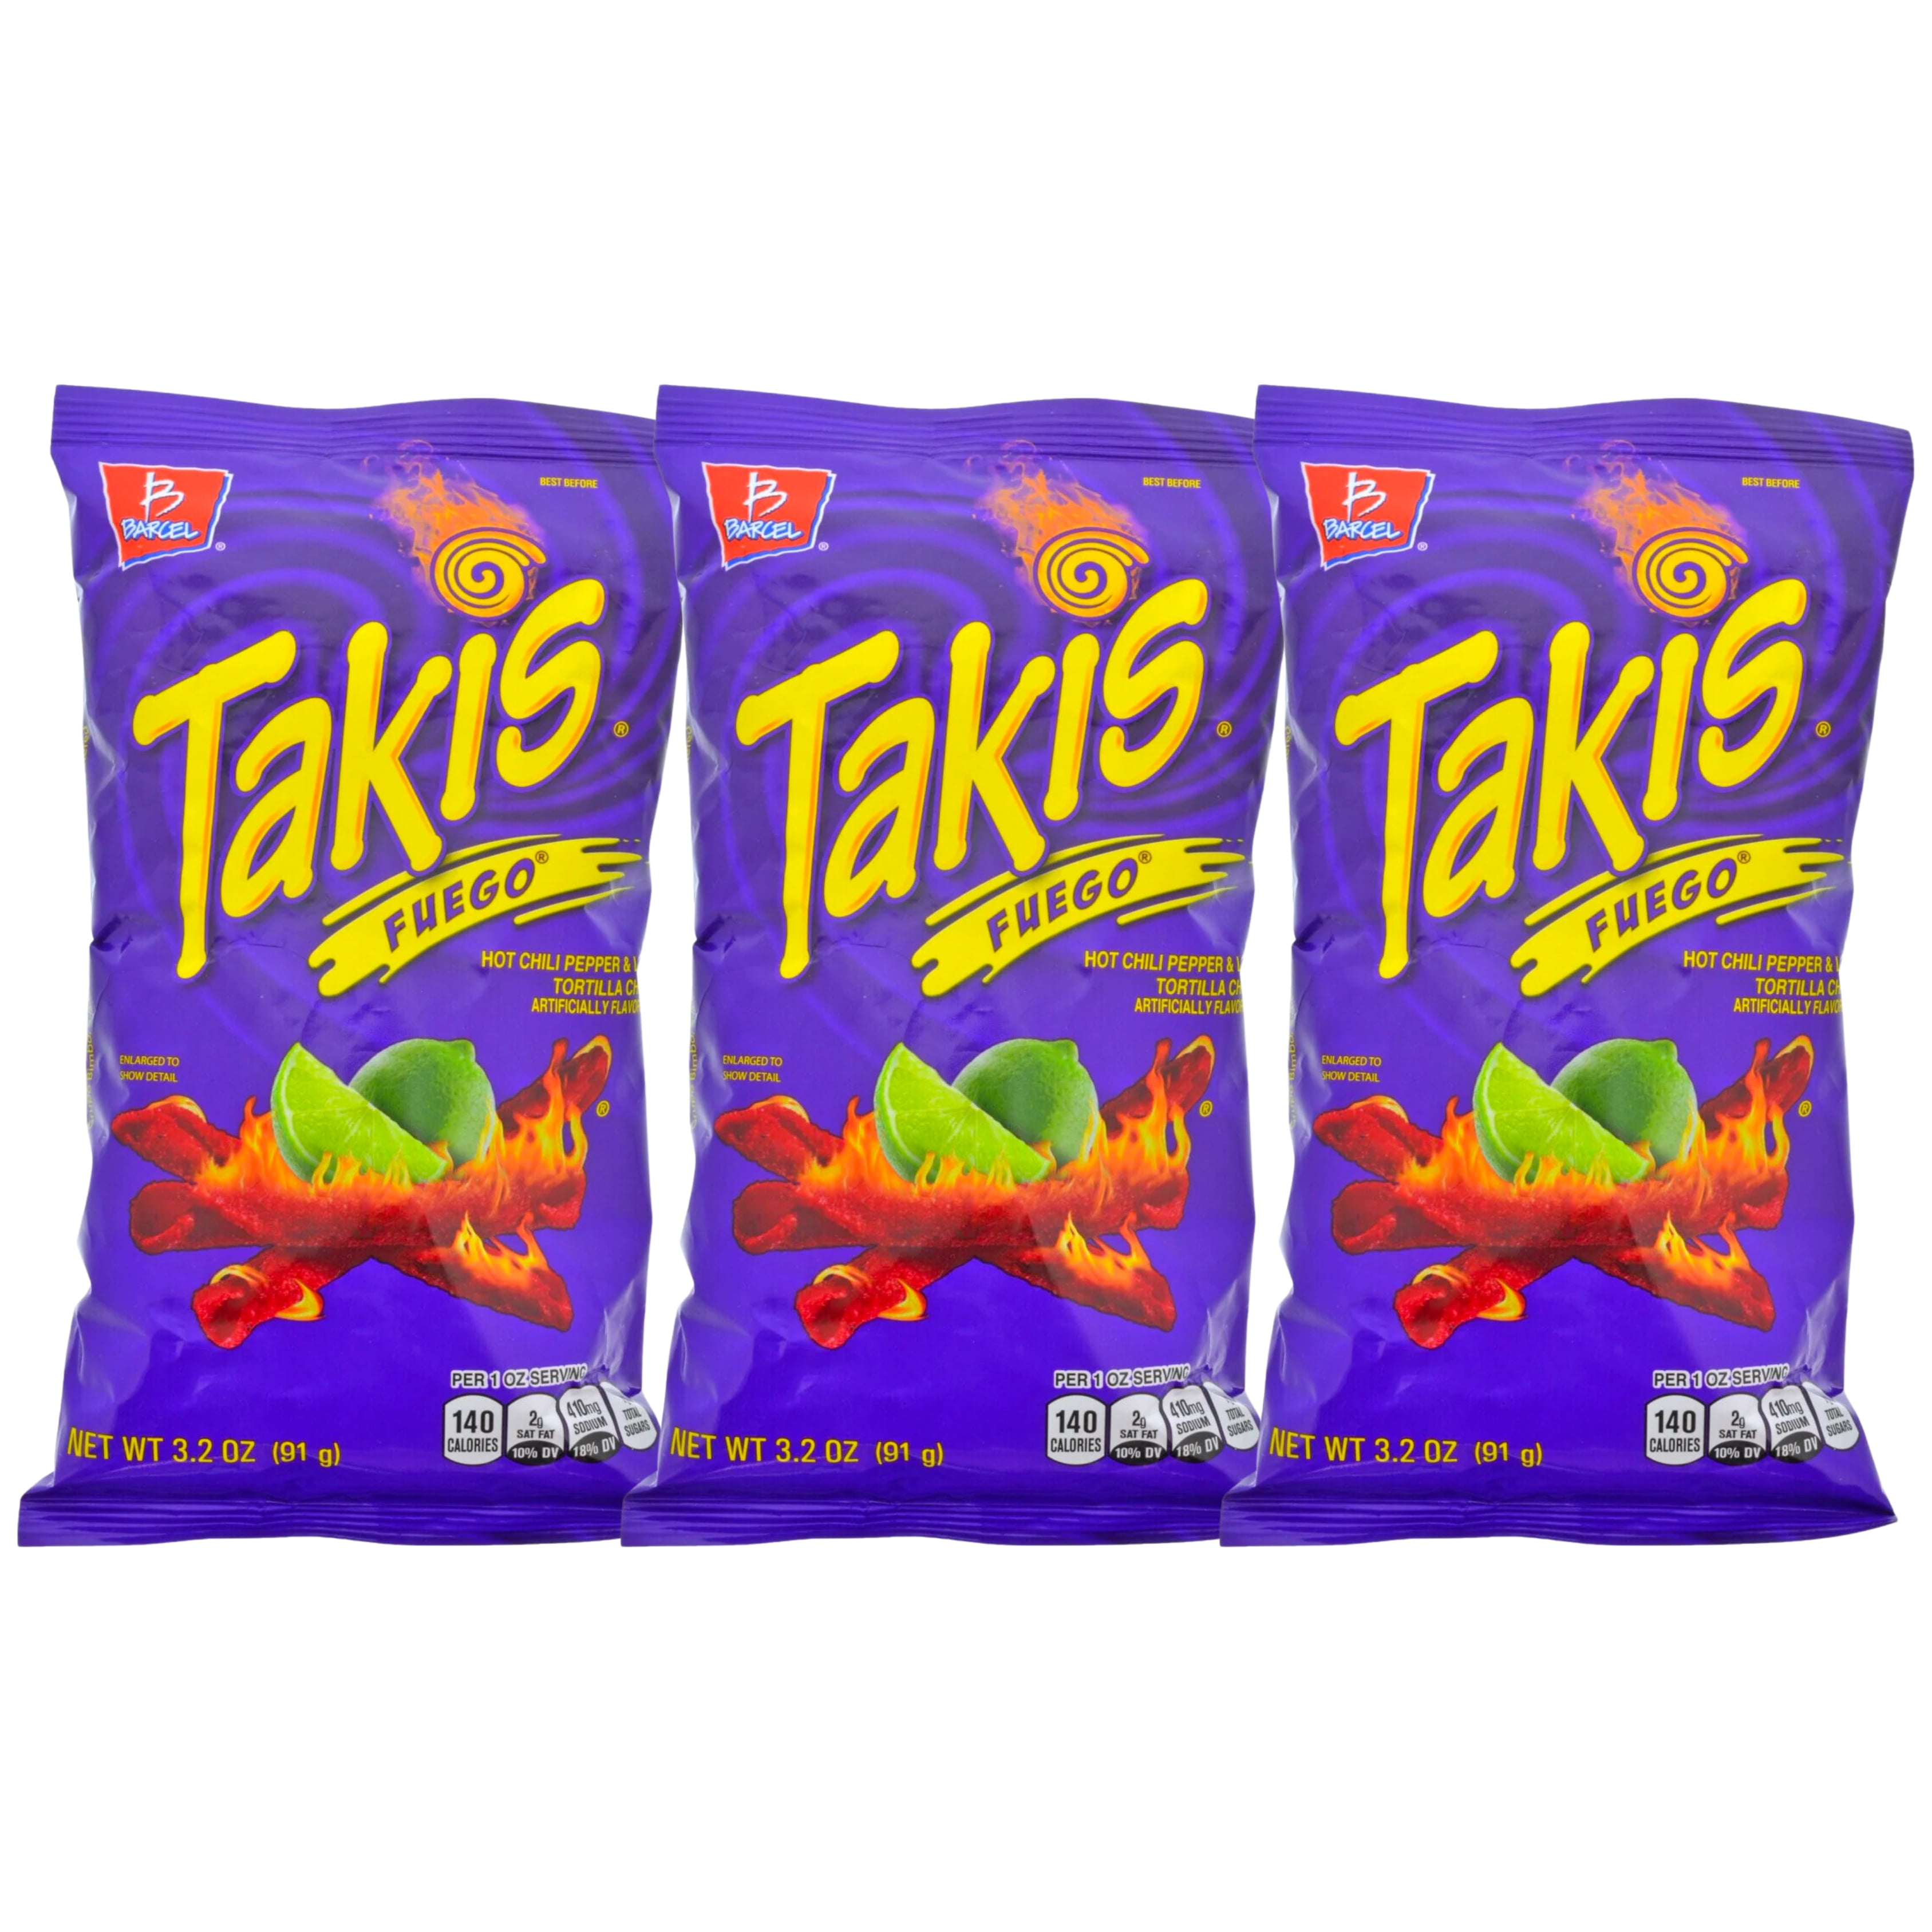 Takis Fuego 9.9oz - Order Online for Delivery or Pickup